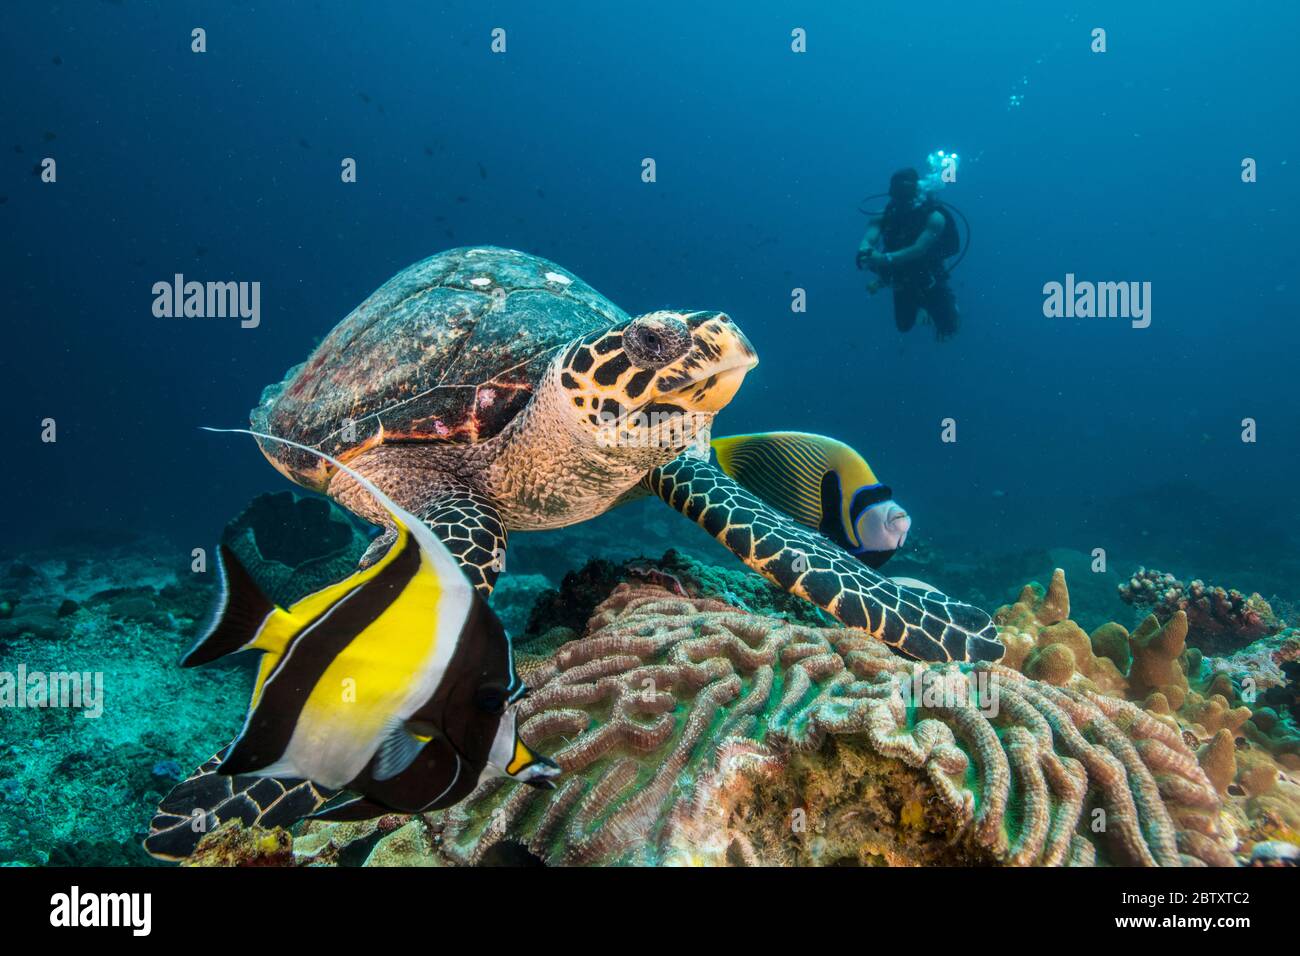 Hawksbill turtle resting on coral next to an Emperor Angelfish & Moorish Idol, with a scuba diver in background, at Nusa Penida, Bali, Indonesia Stock Photo